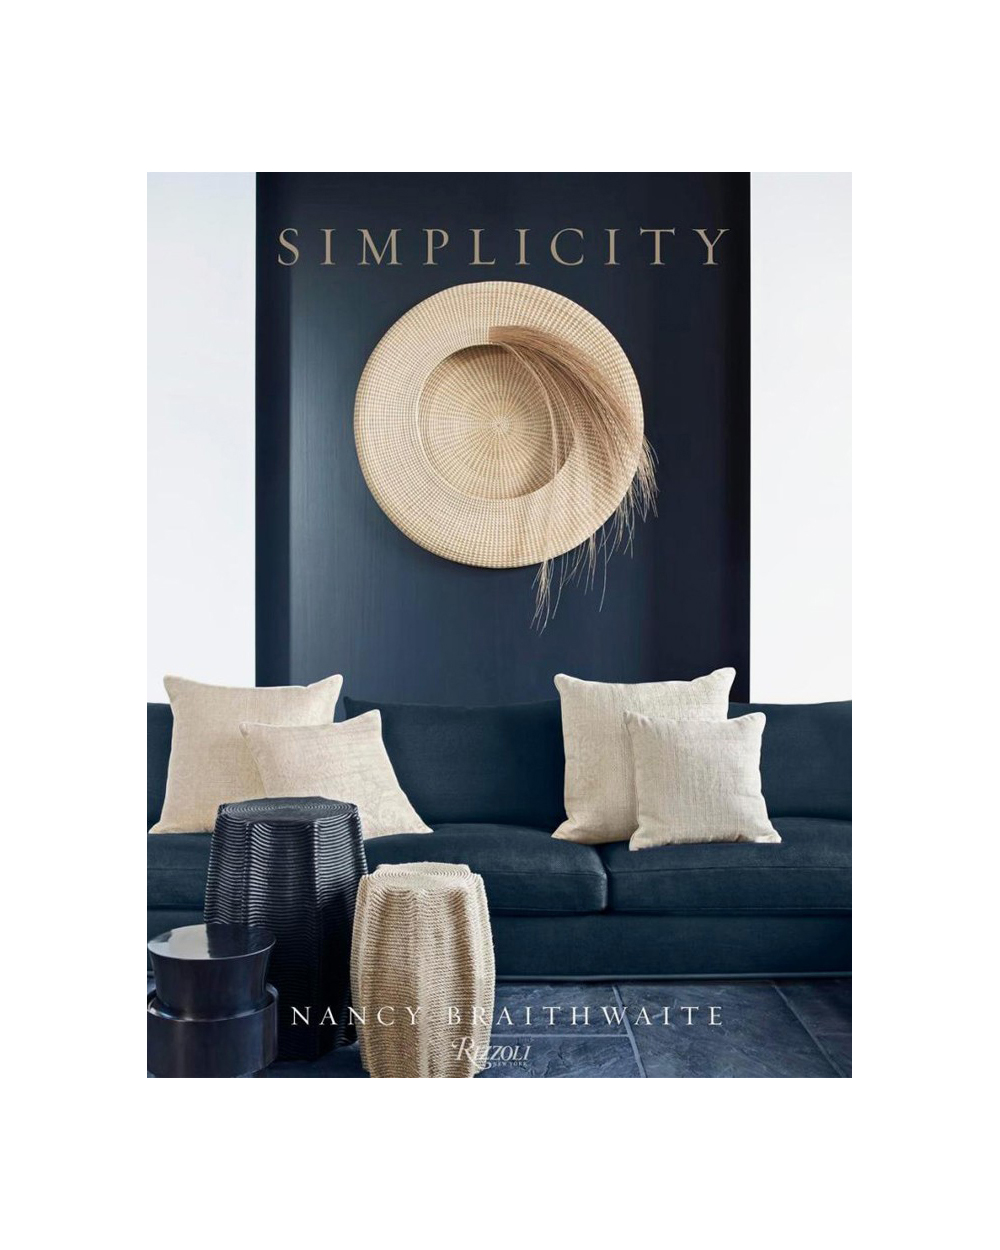 Simplicity $89 from Superette